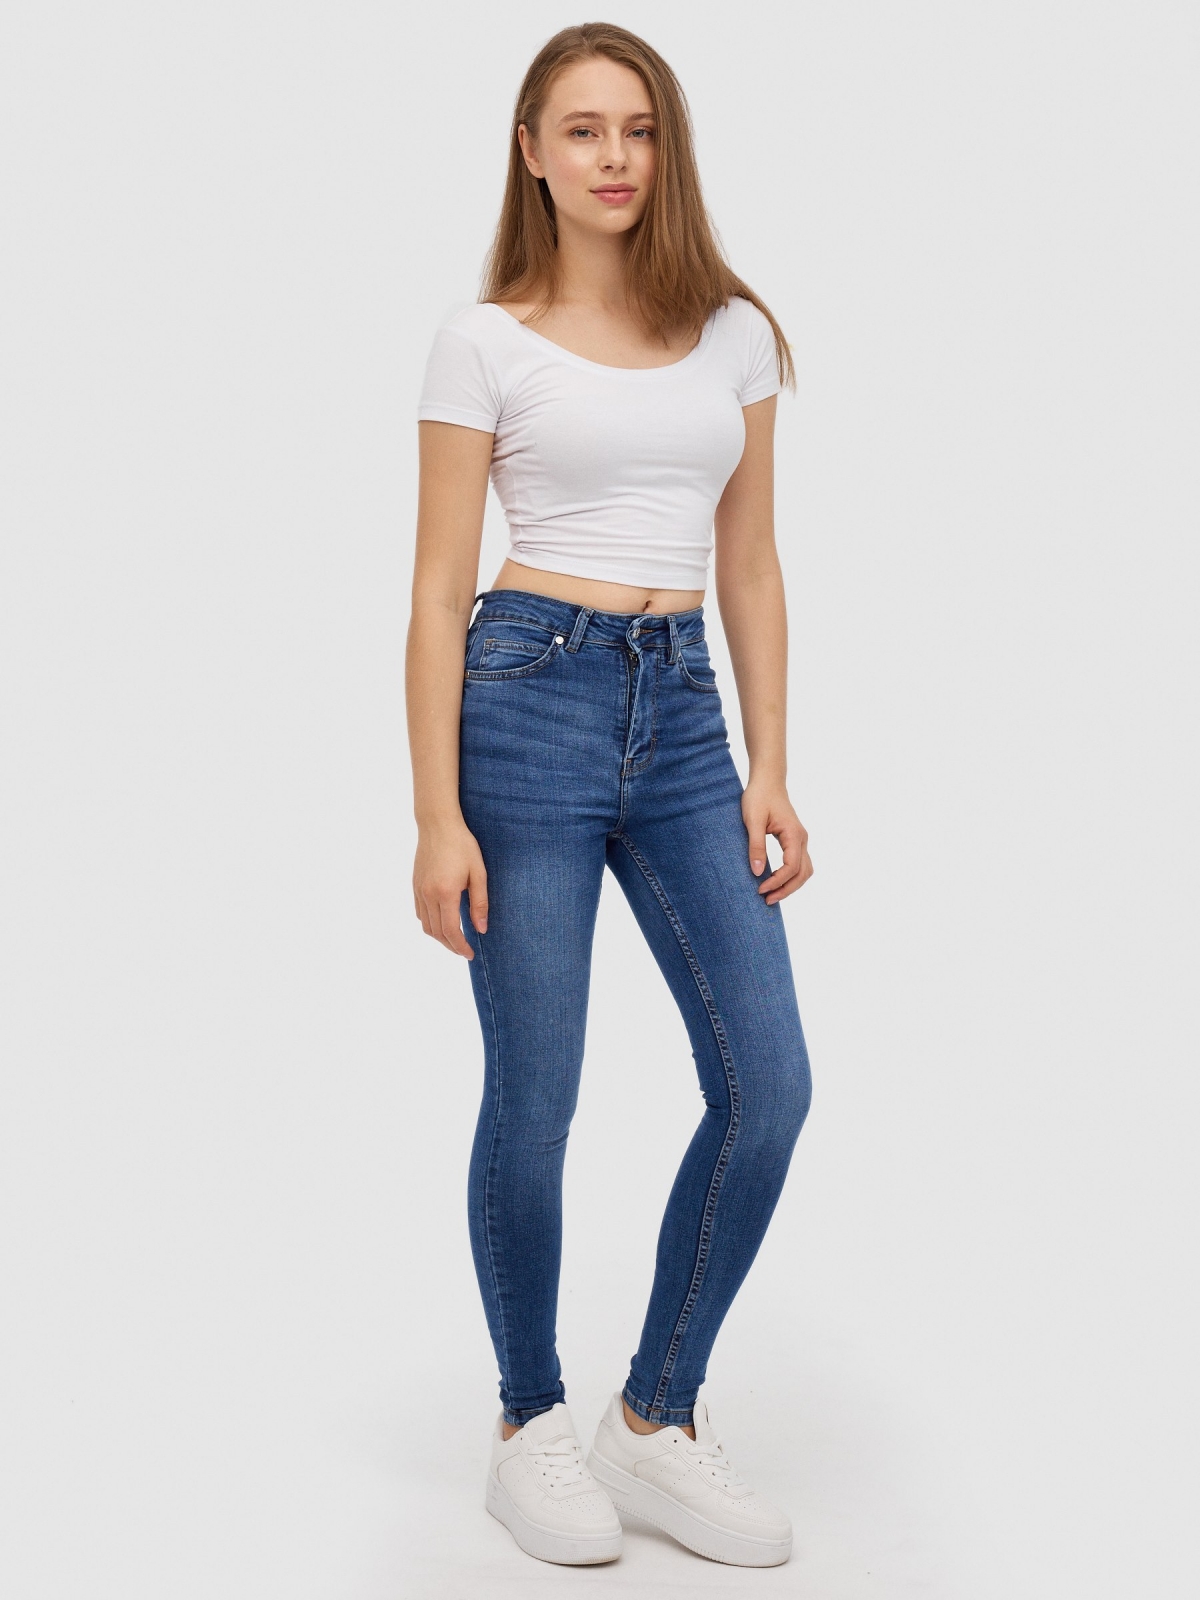 Skinny jeans push up high rise blue front view